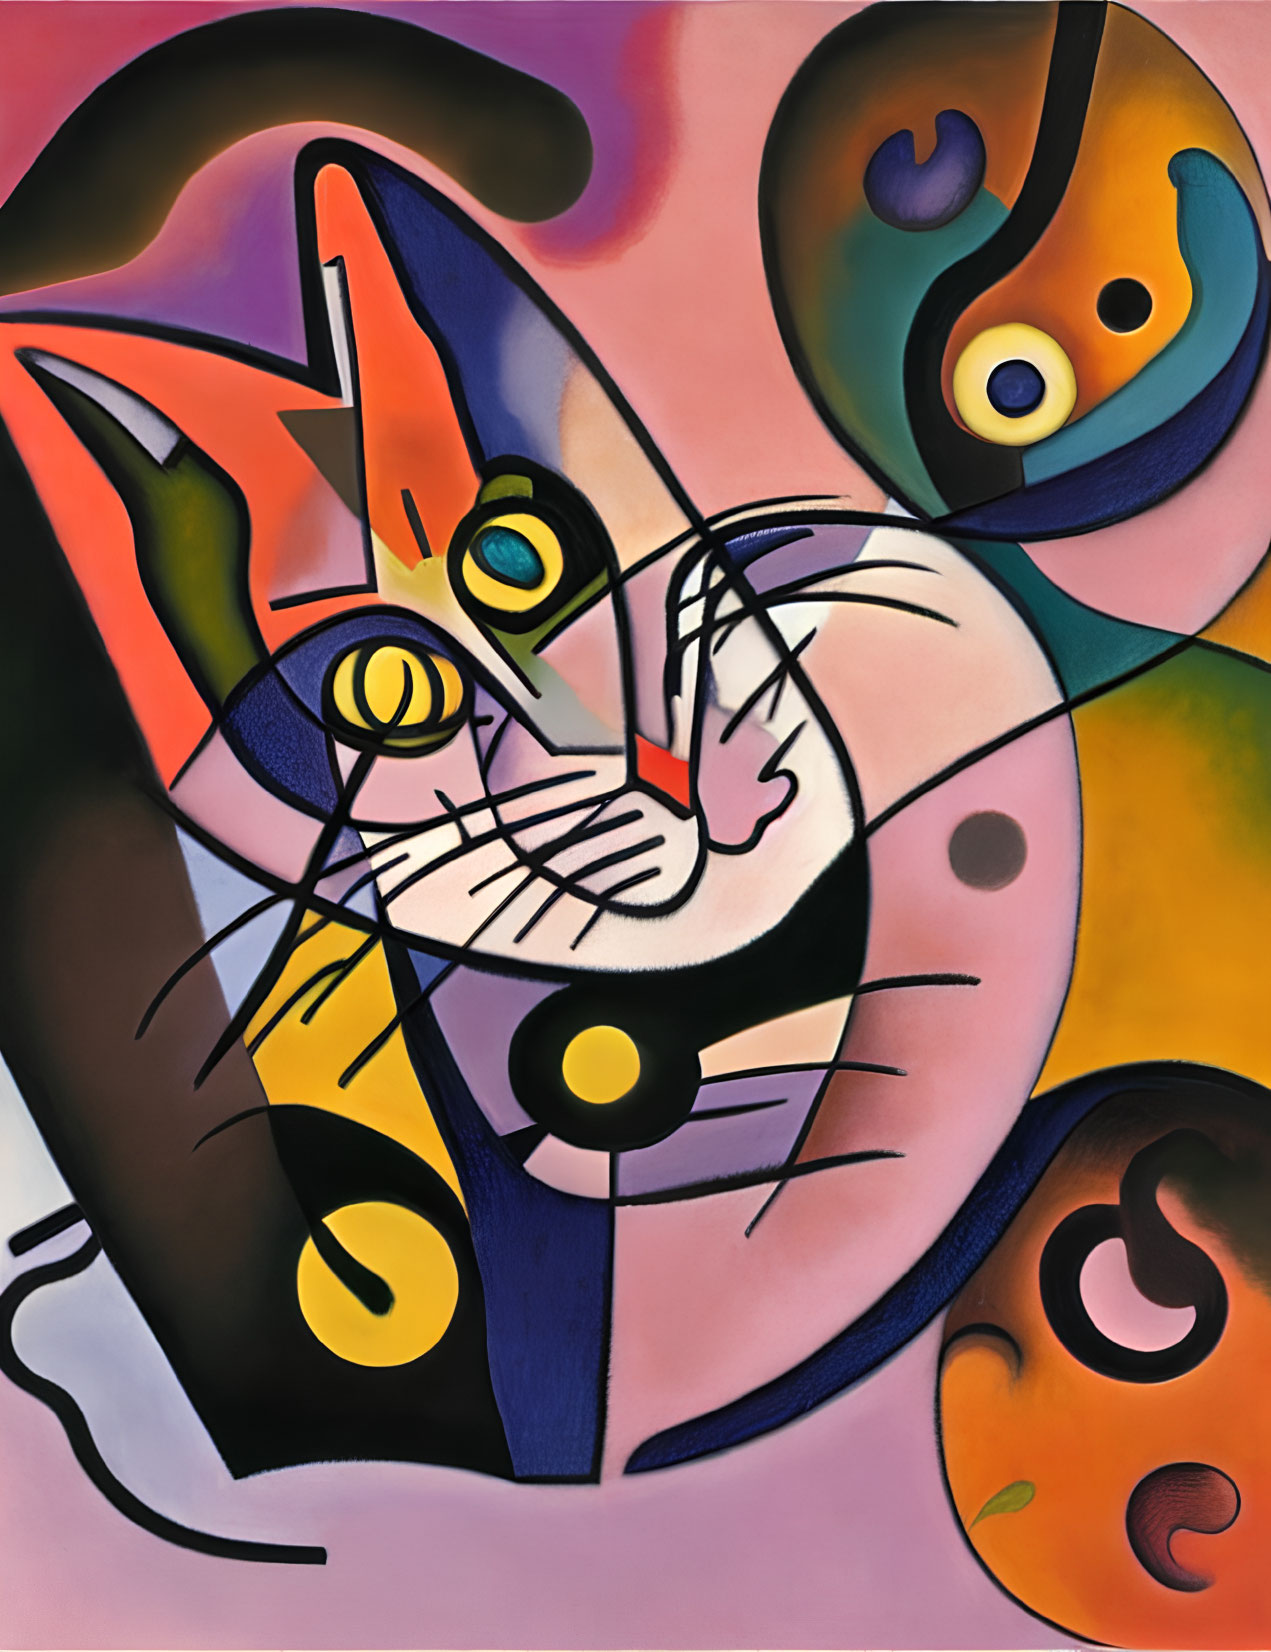 Colorful Abstract Cubist Style Cat Painting